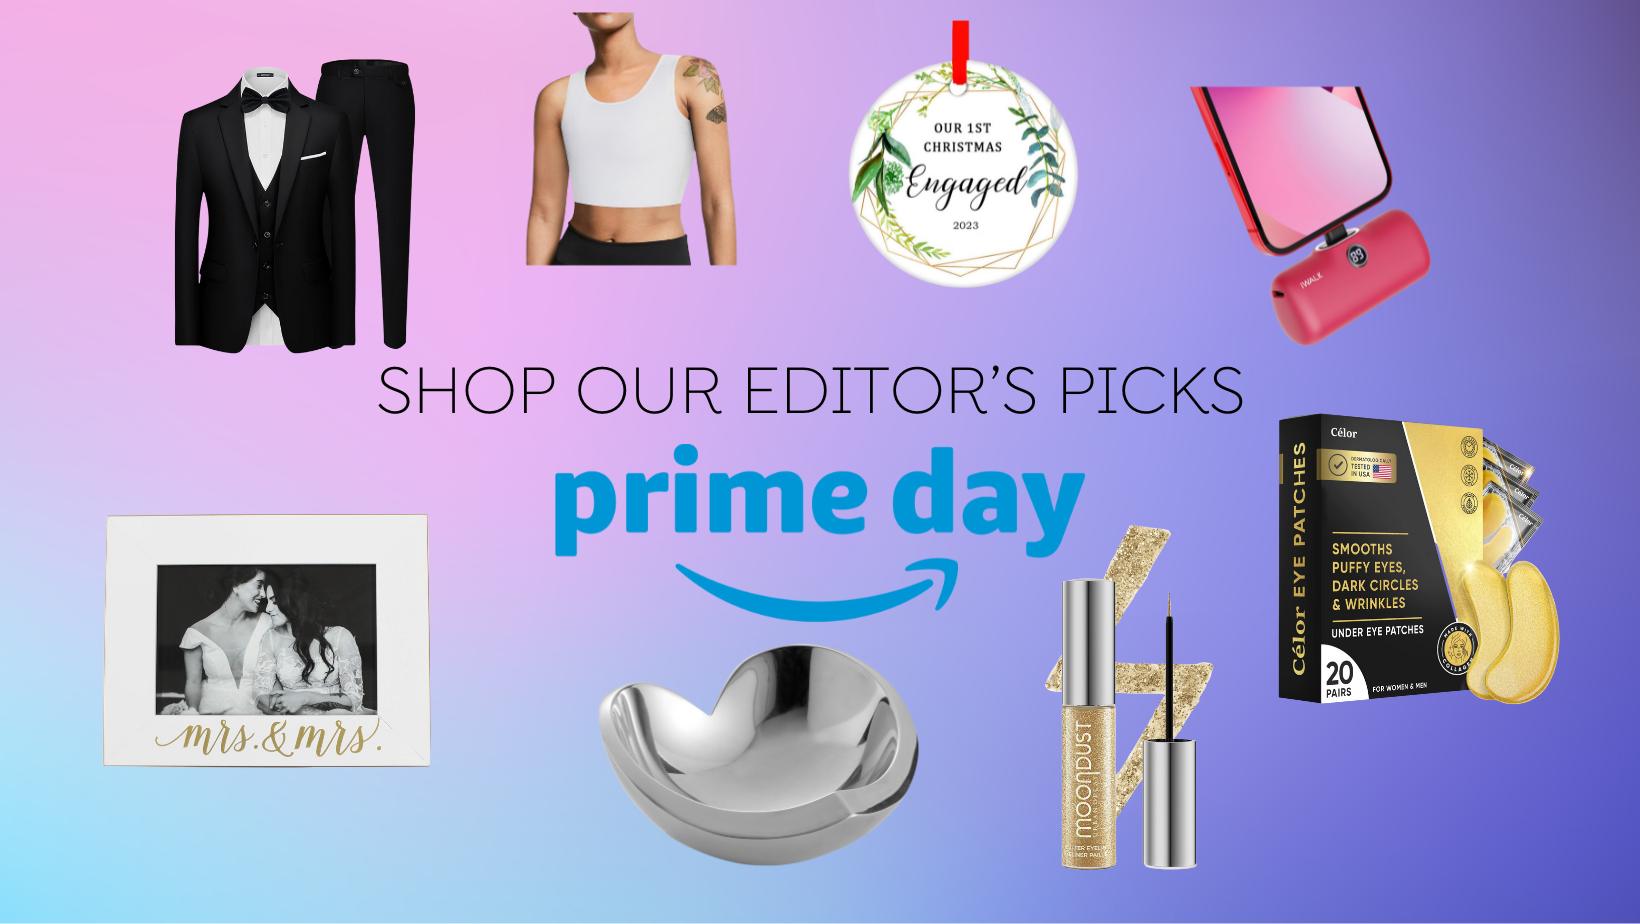 Prime Day 2023: Best Discounts, Deals, Tips on What to Shop